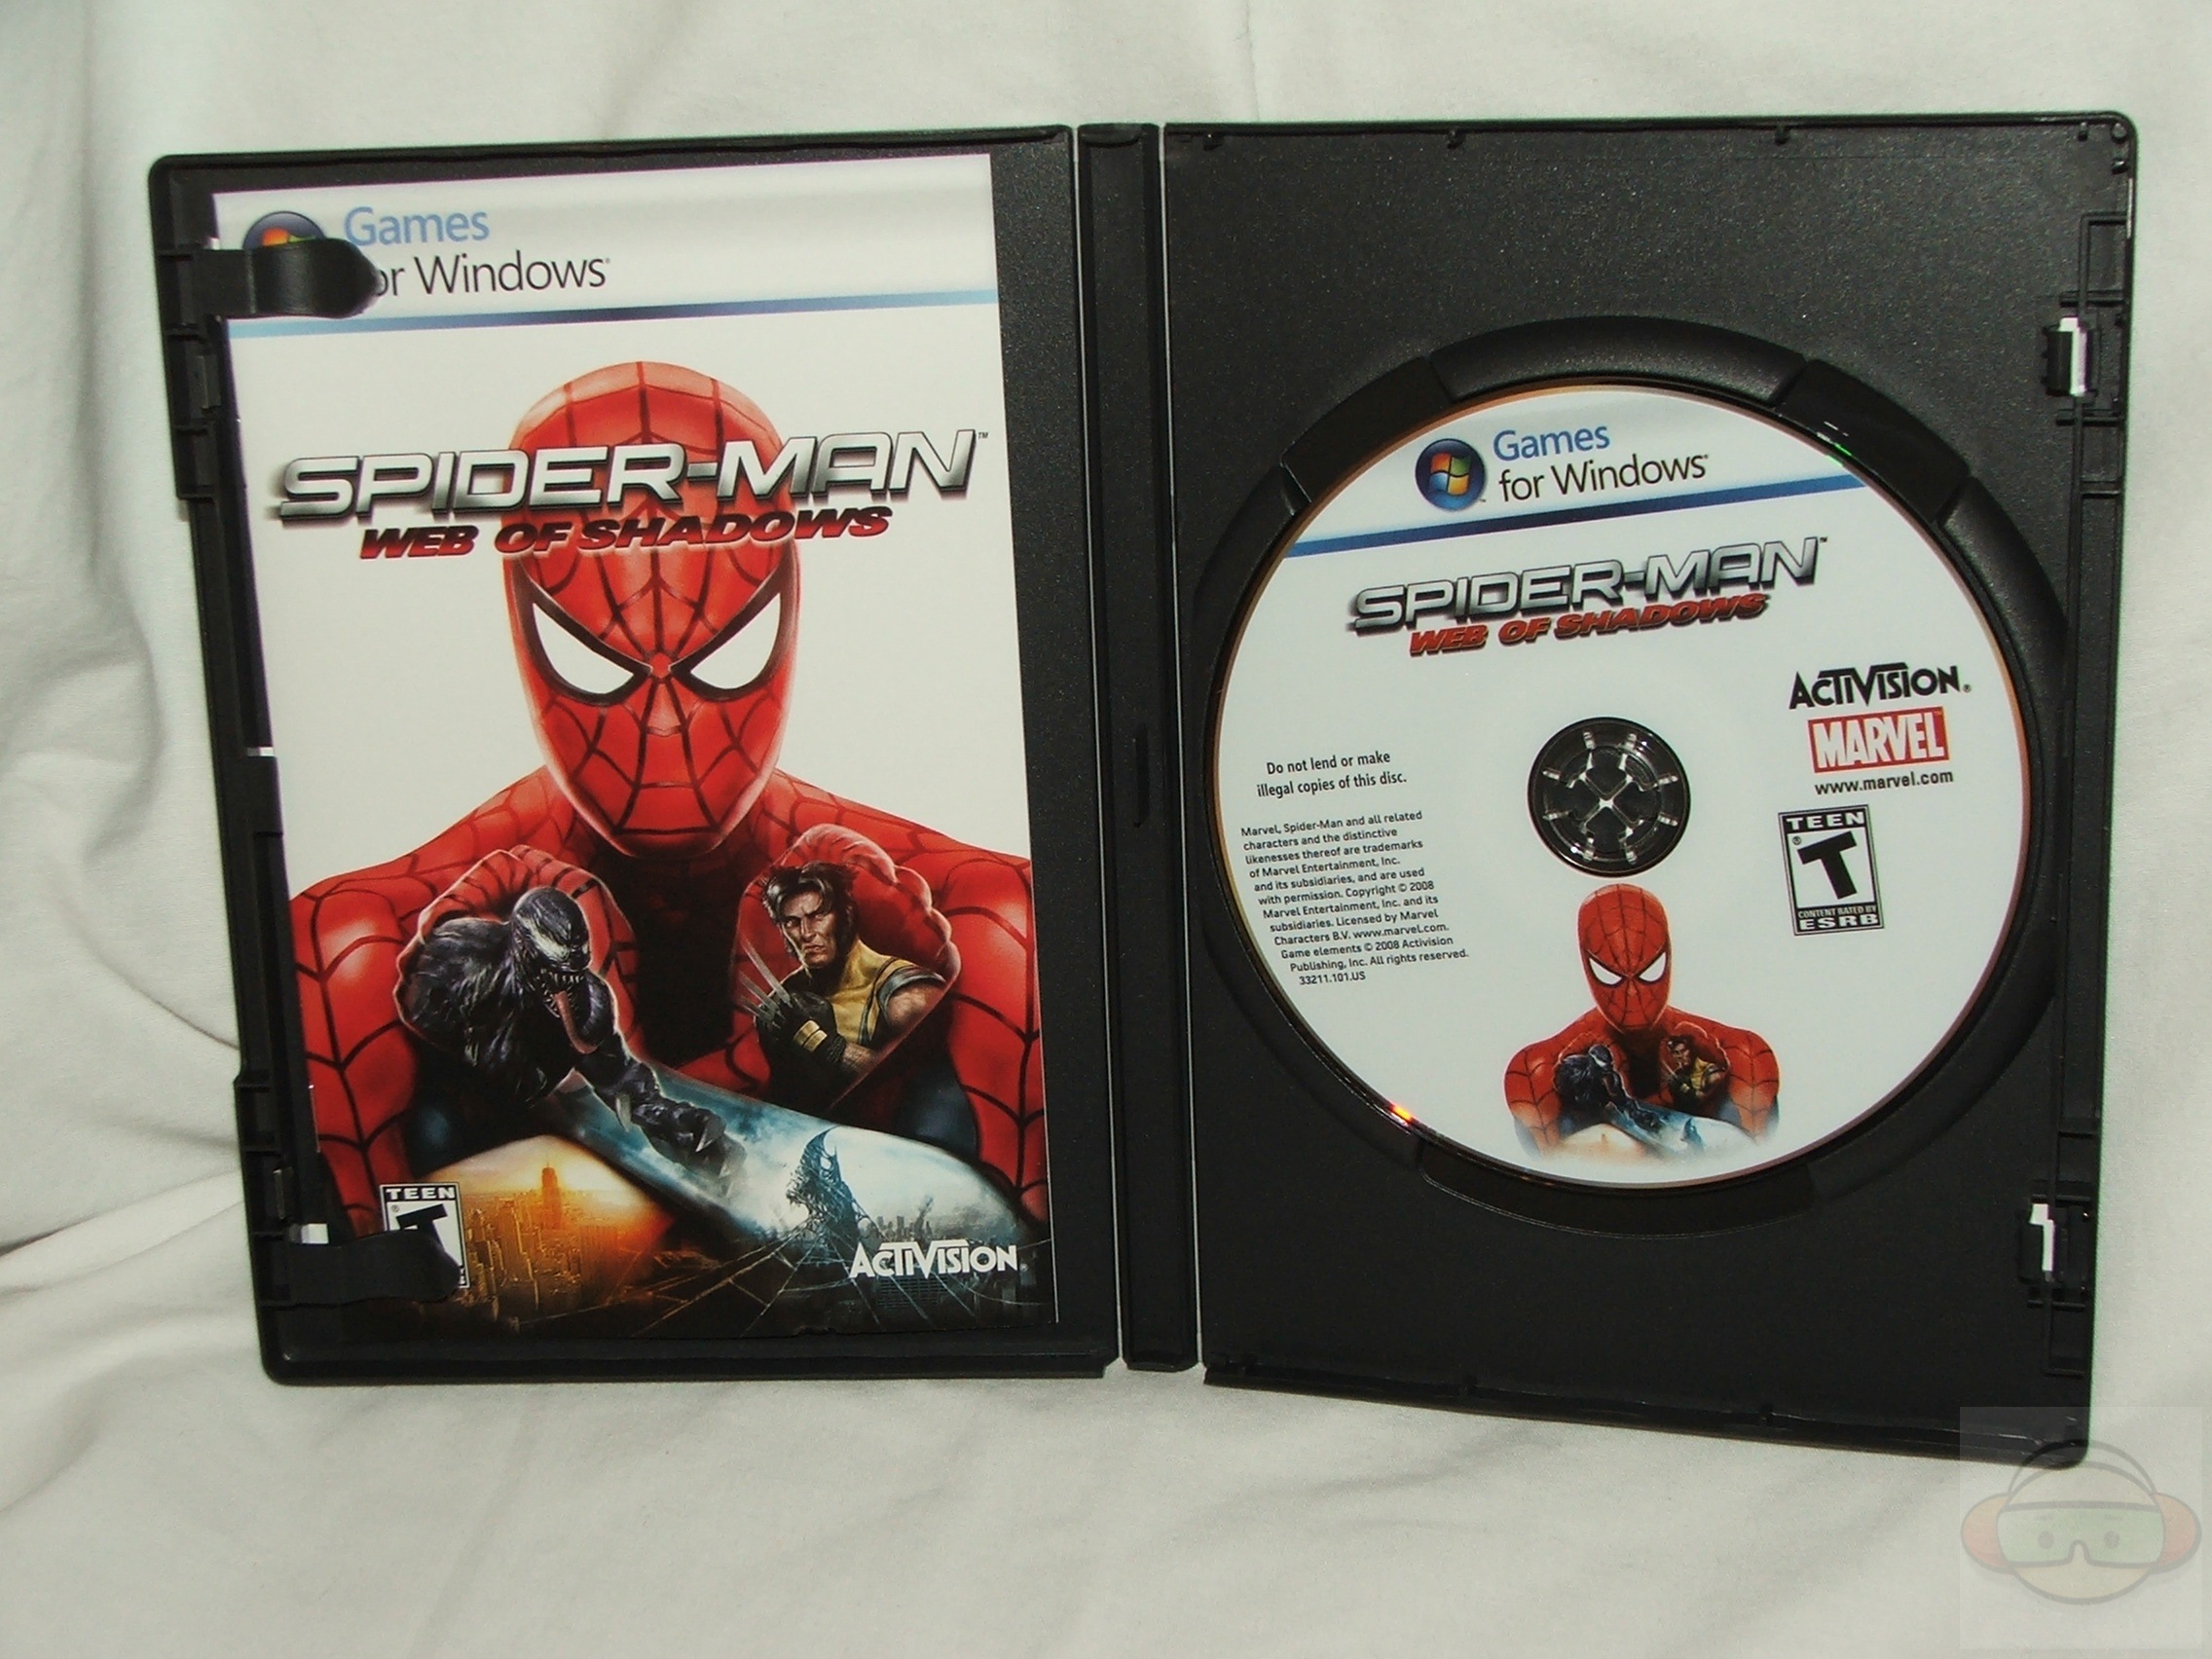 spider man web of shadows pc patch 1.1